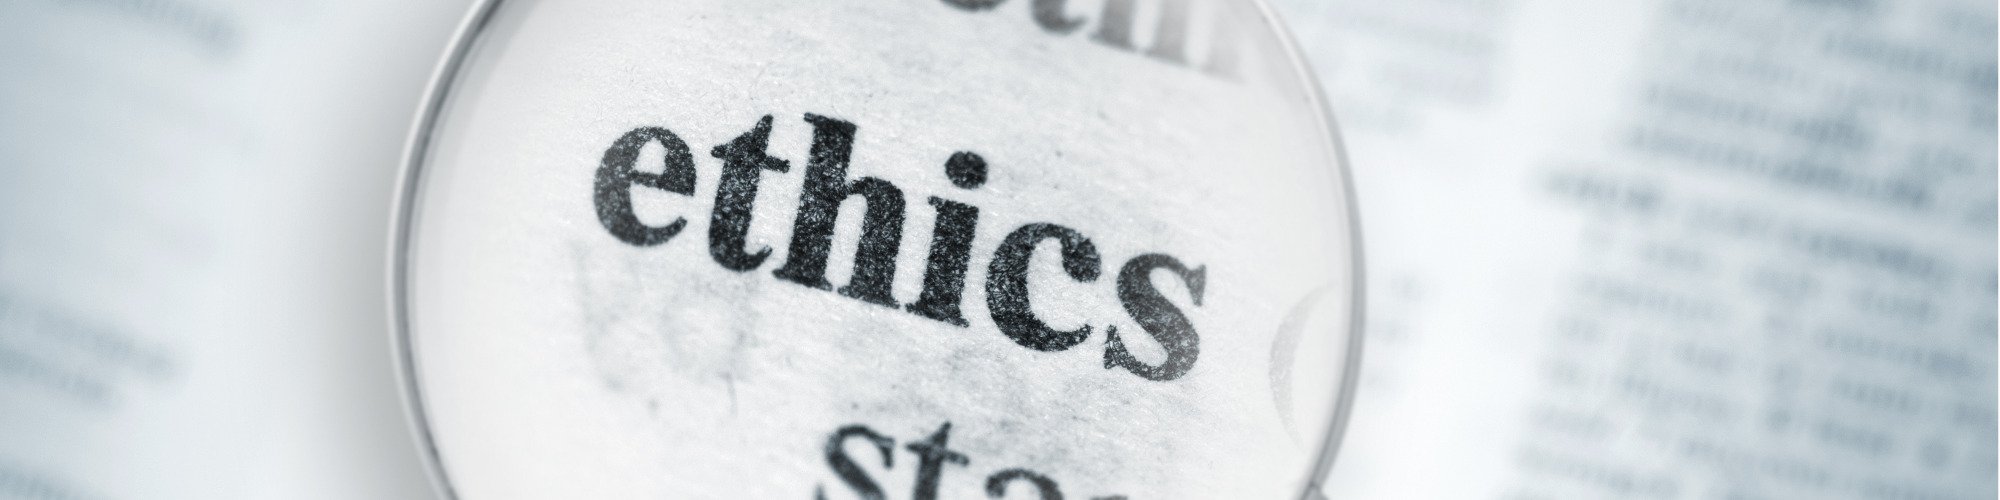 Professional Ethics - A Practical Guide for SQE Candidates